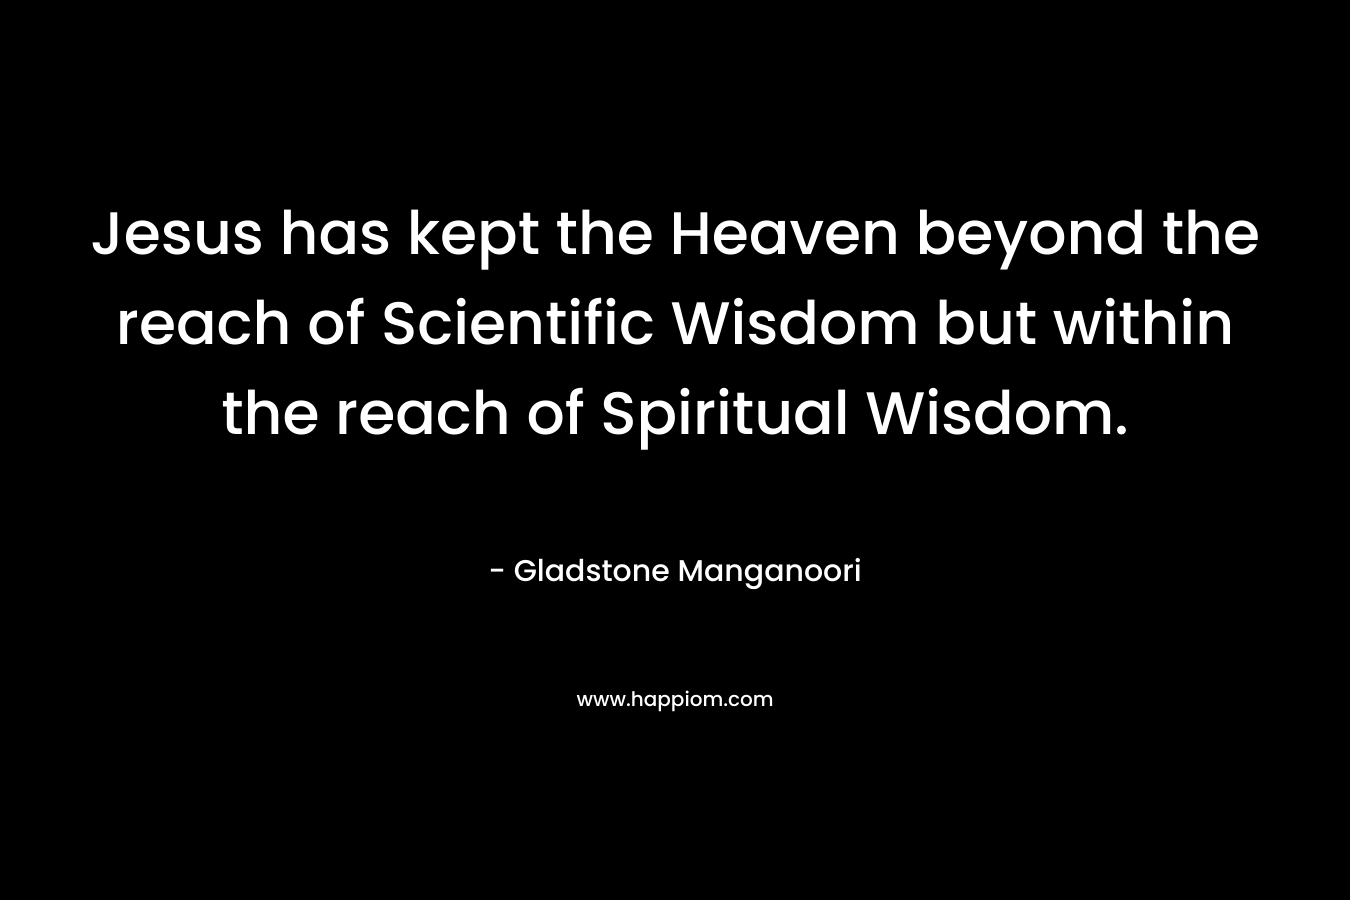 Jesus has kept the Heaven beyond the reach of Scientific Wisdom but within the reach of Spiritual Wisdom.